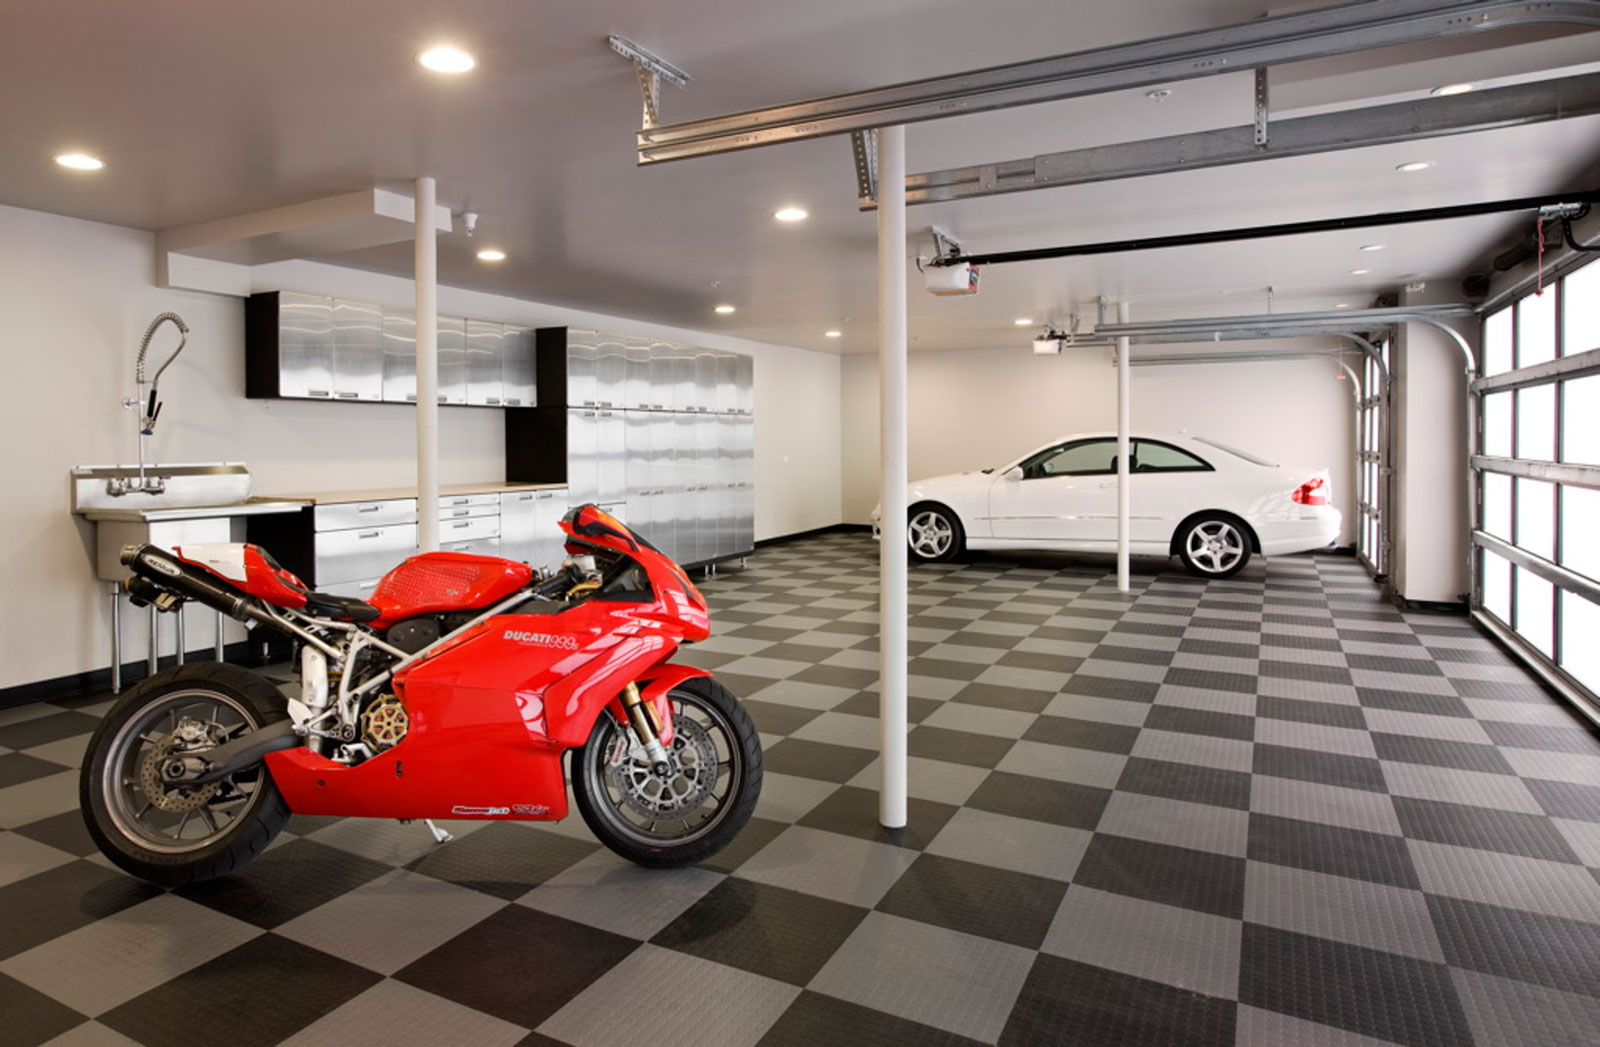 Design Ideas Contemporary Lovely Garage Design Ideas Decorated With Amazing Contemporary Style Using Industrial Ceiling Style And Black Grey Tile Flooring Decoration Decoration Garage Design Ideas With Cabinet And Hanger Compartment For The Sake Of Good Arrangement